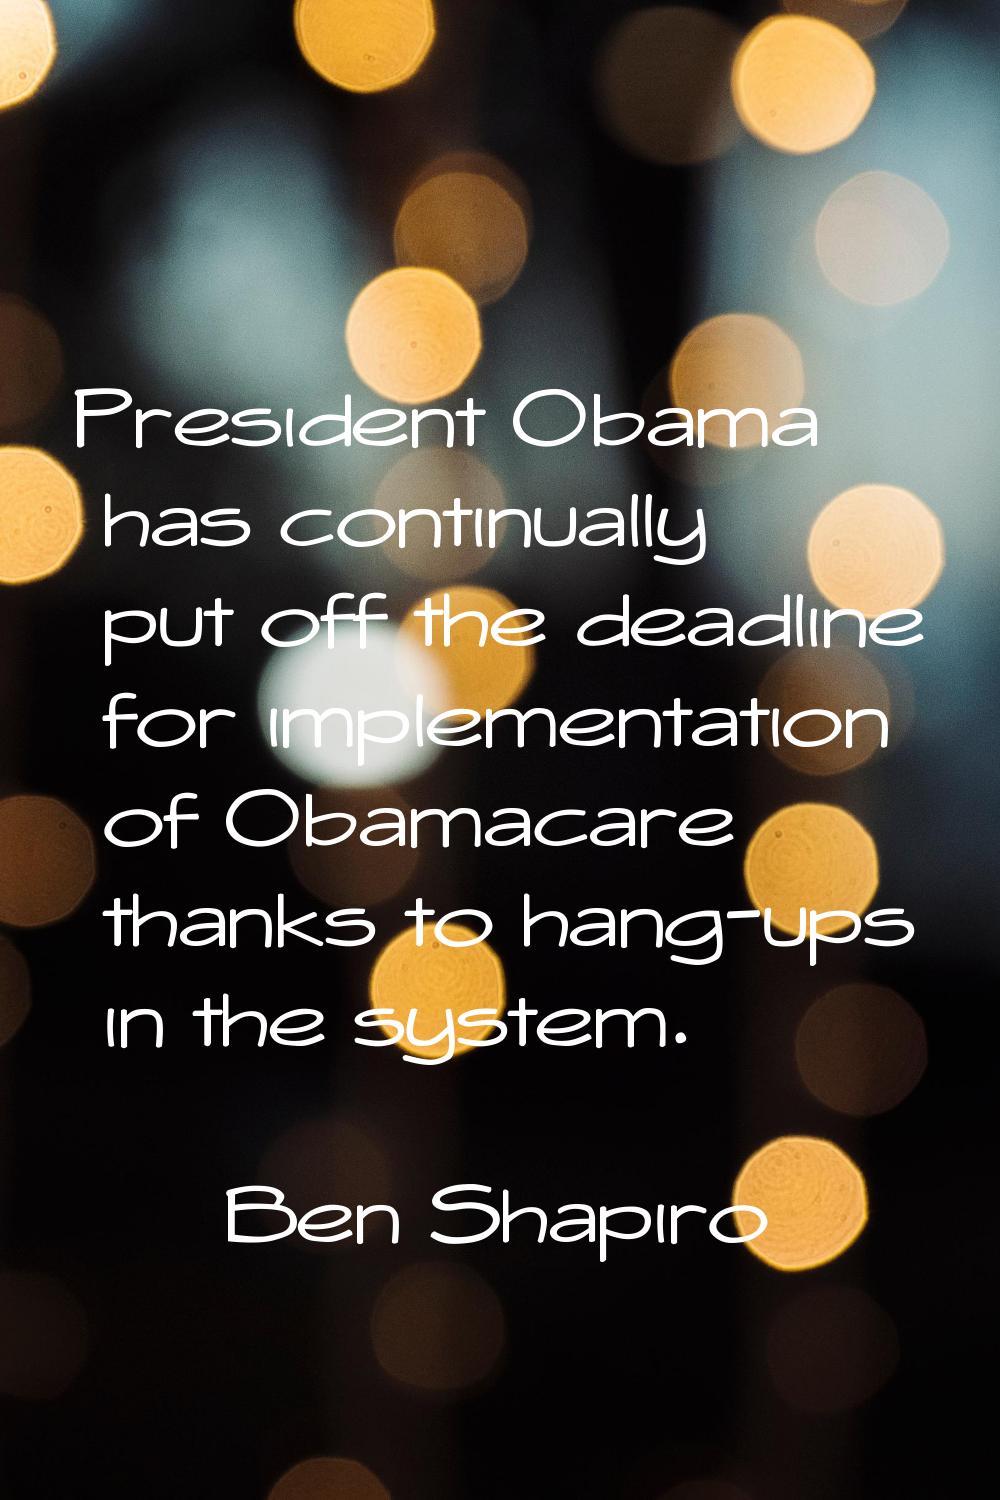 President Obama has continually put off the deadline for implementation of Obamacare thanks to hang